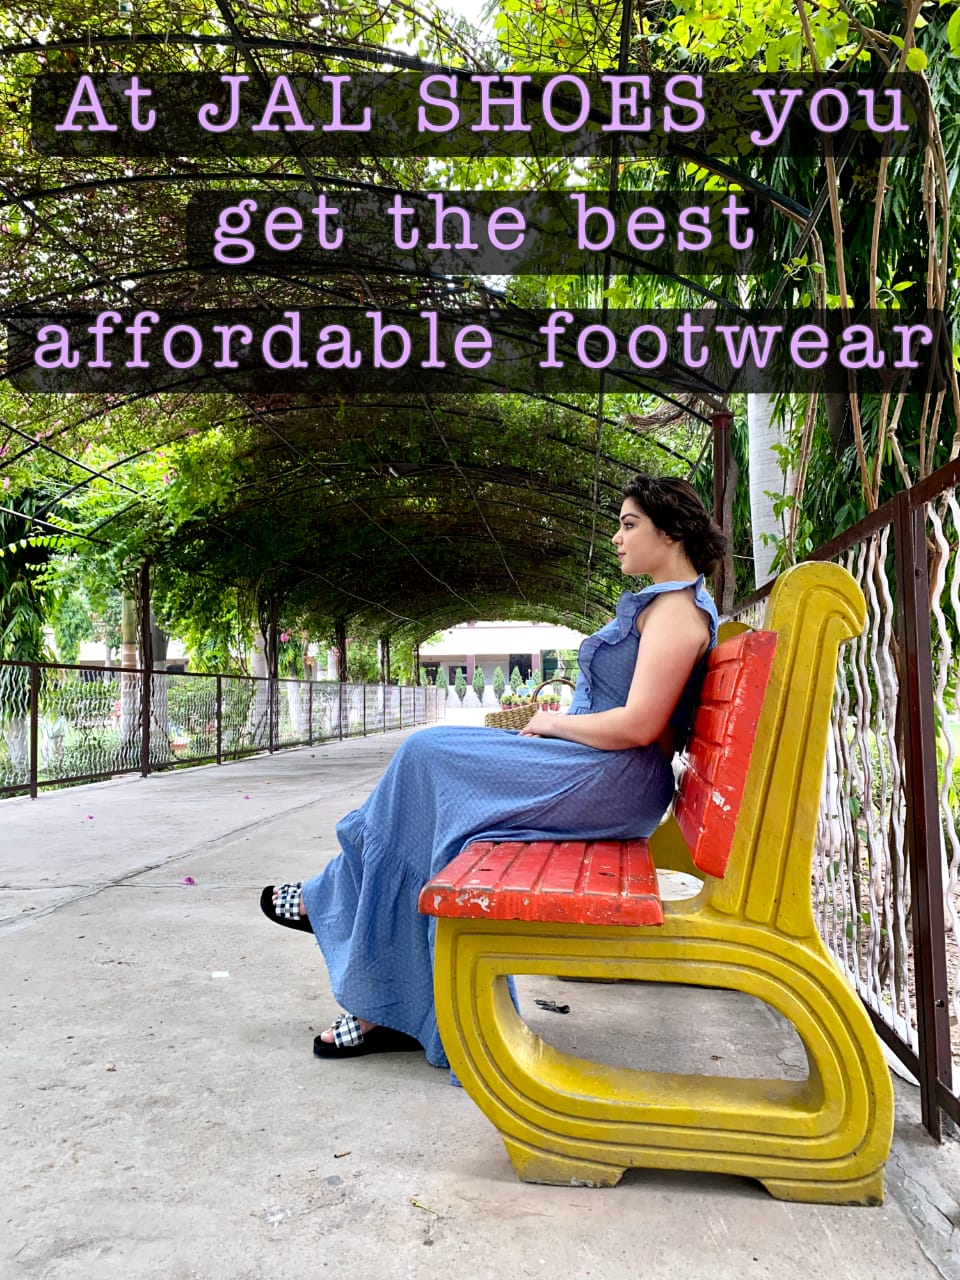 At JAL SHOES you get the best affordable footwear